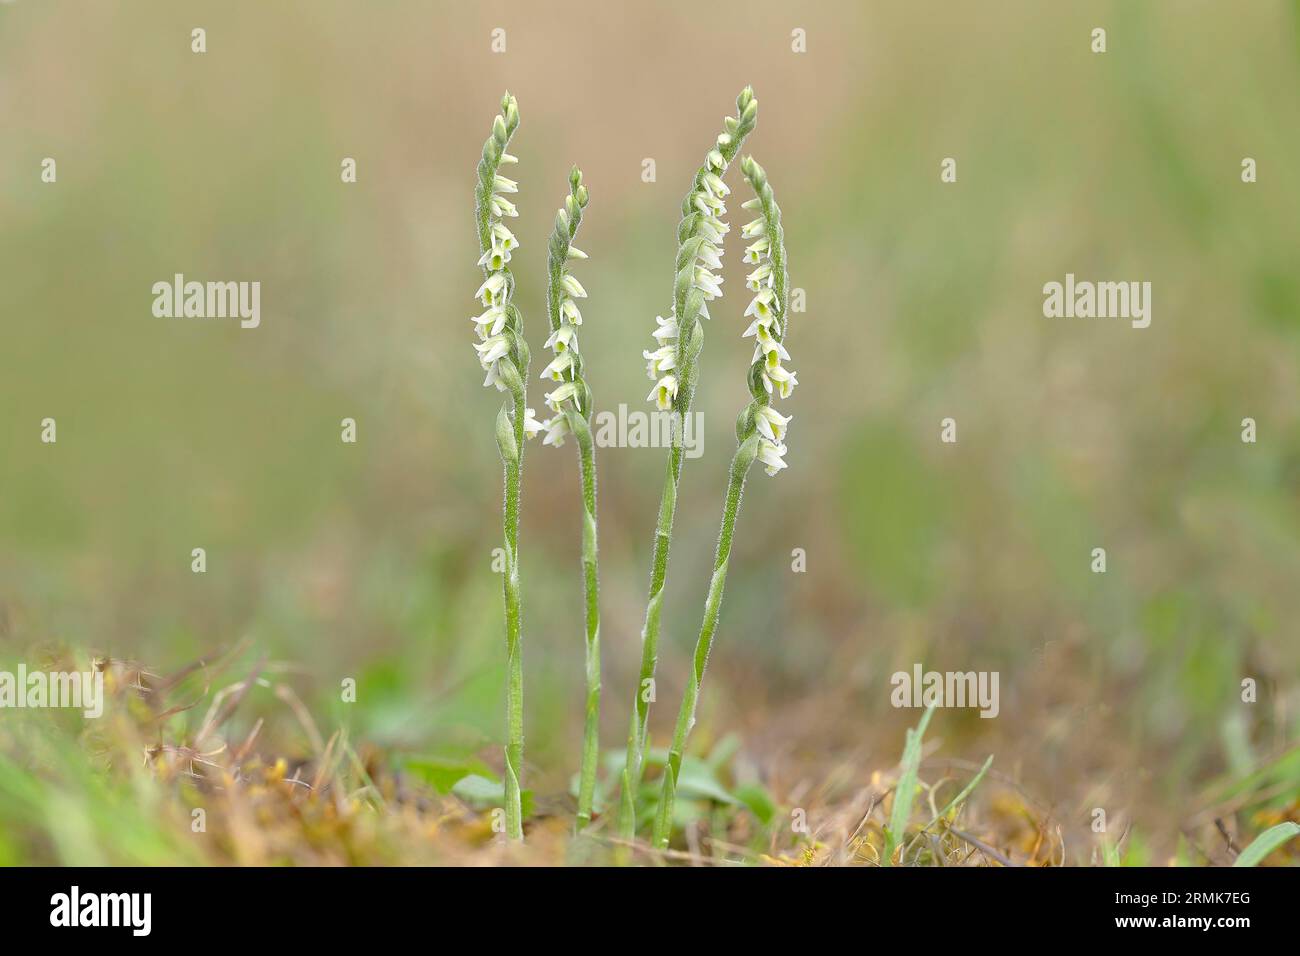 Autumn lady's-tresses (Spiranthes spiralis), flowering plant group, Hesse, Germany Stock Photo